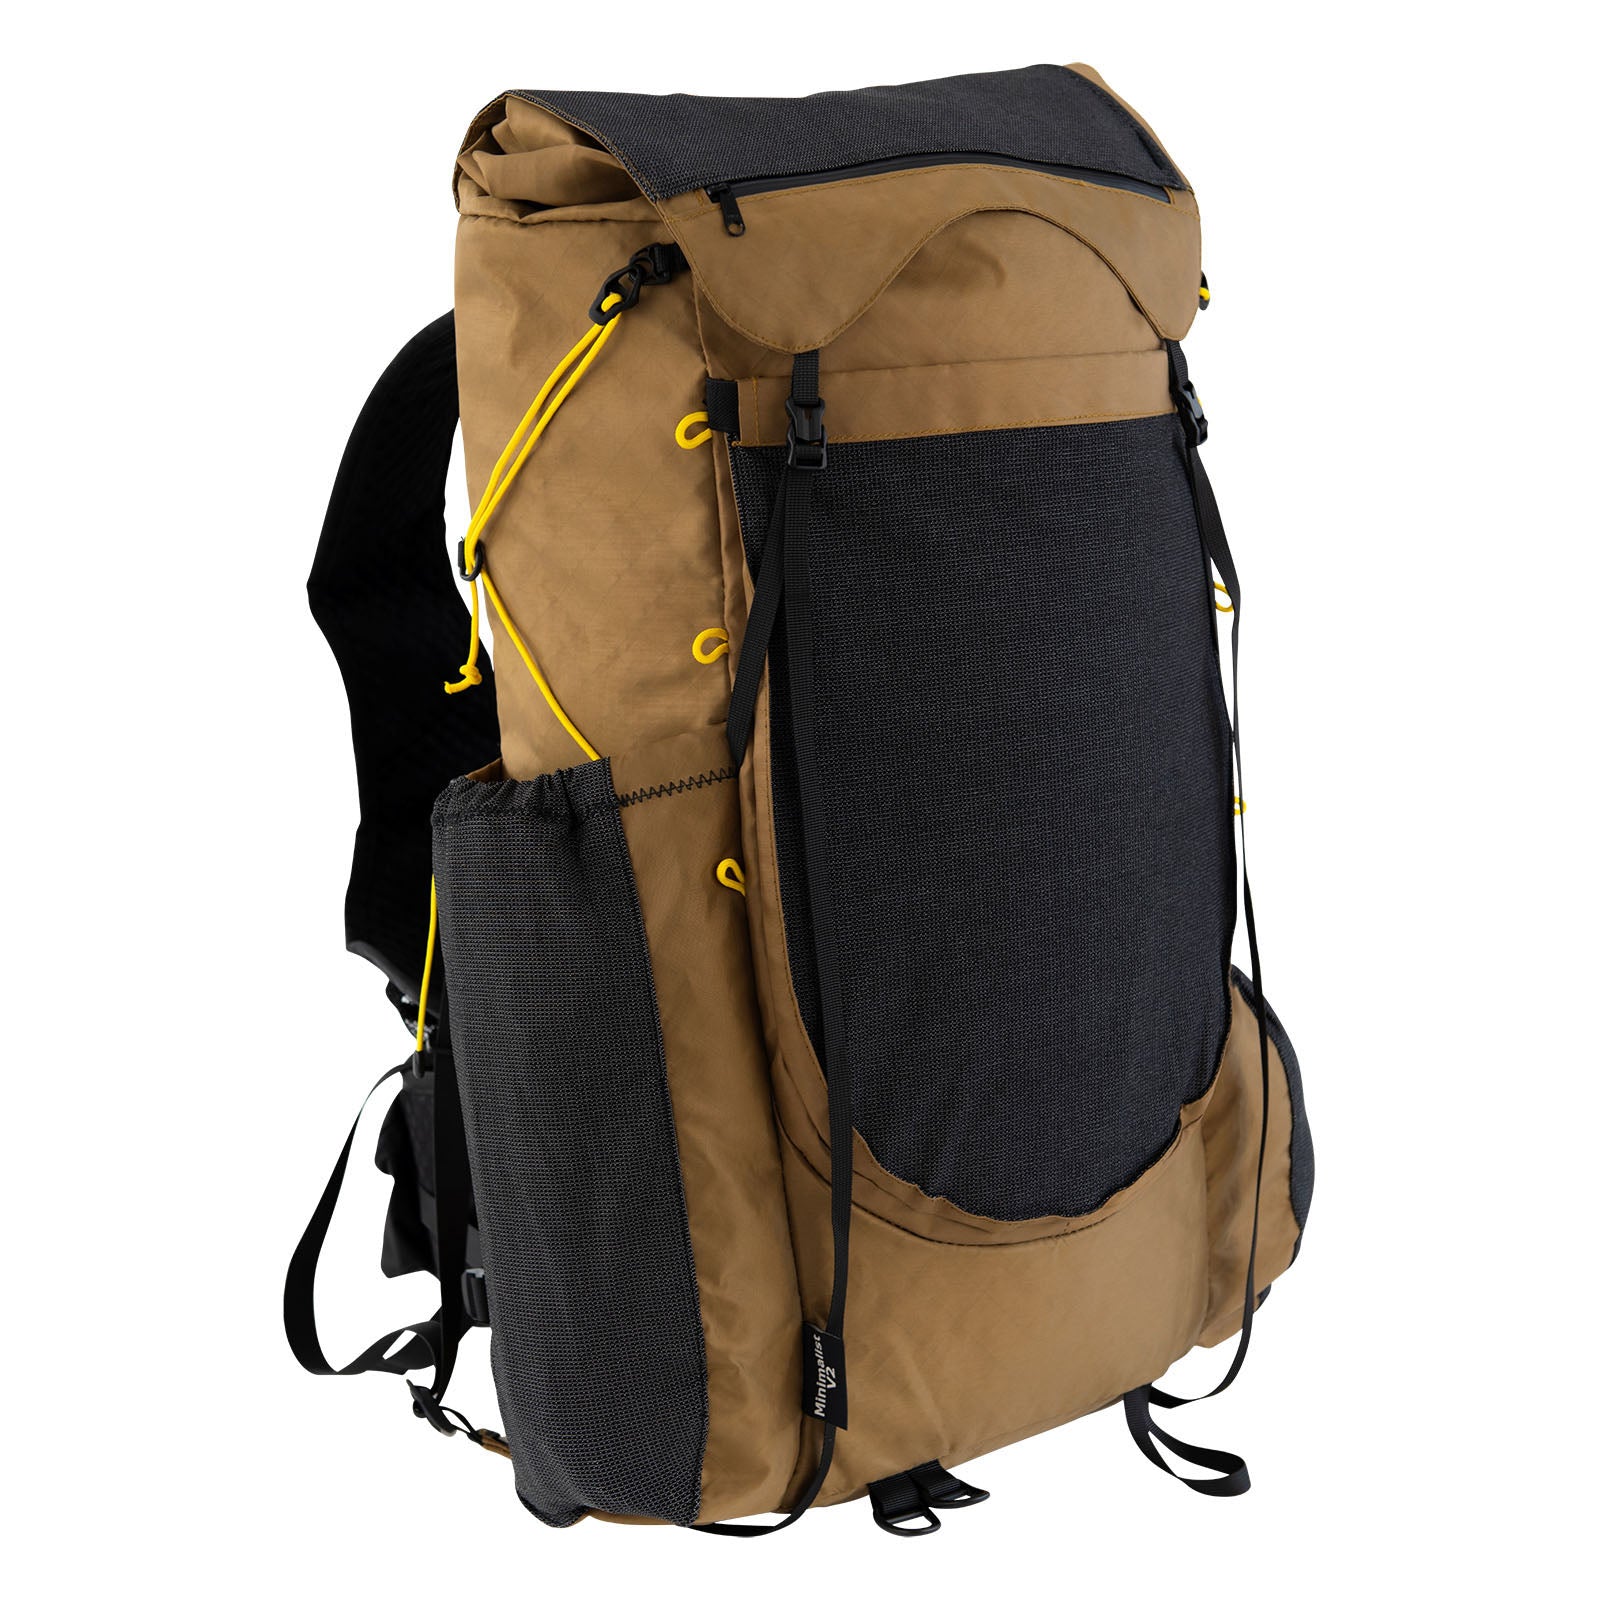 Multi-day hiking backpacks: rucksacks with 40 litre capacity and more